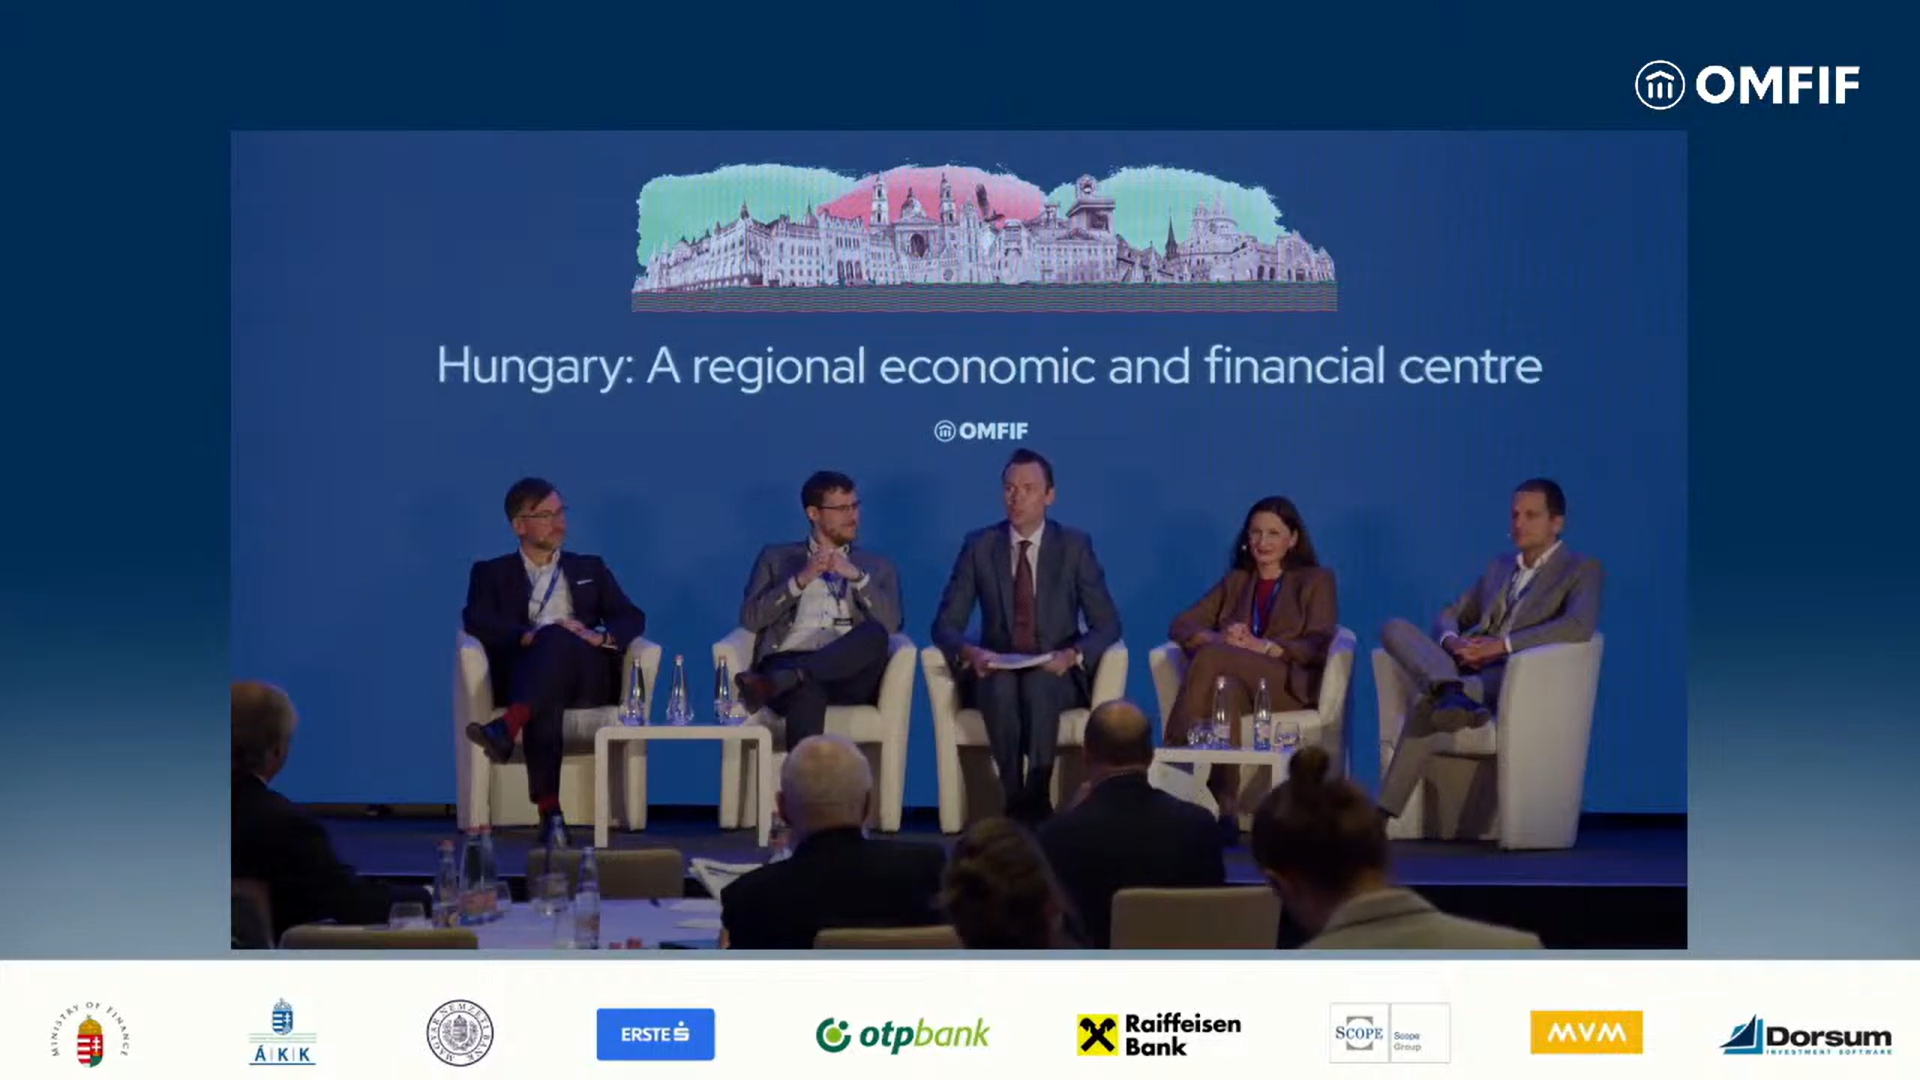 Dorsum at OMFIF’s “Hungary: A regional economic and financial centre” conference